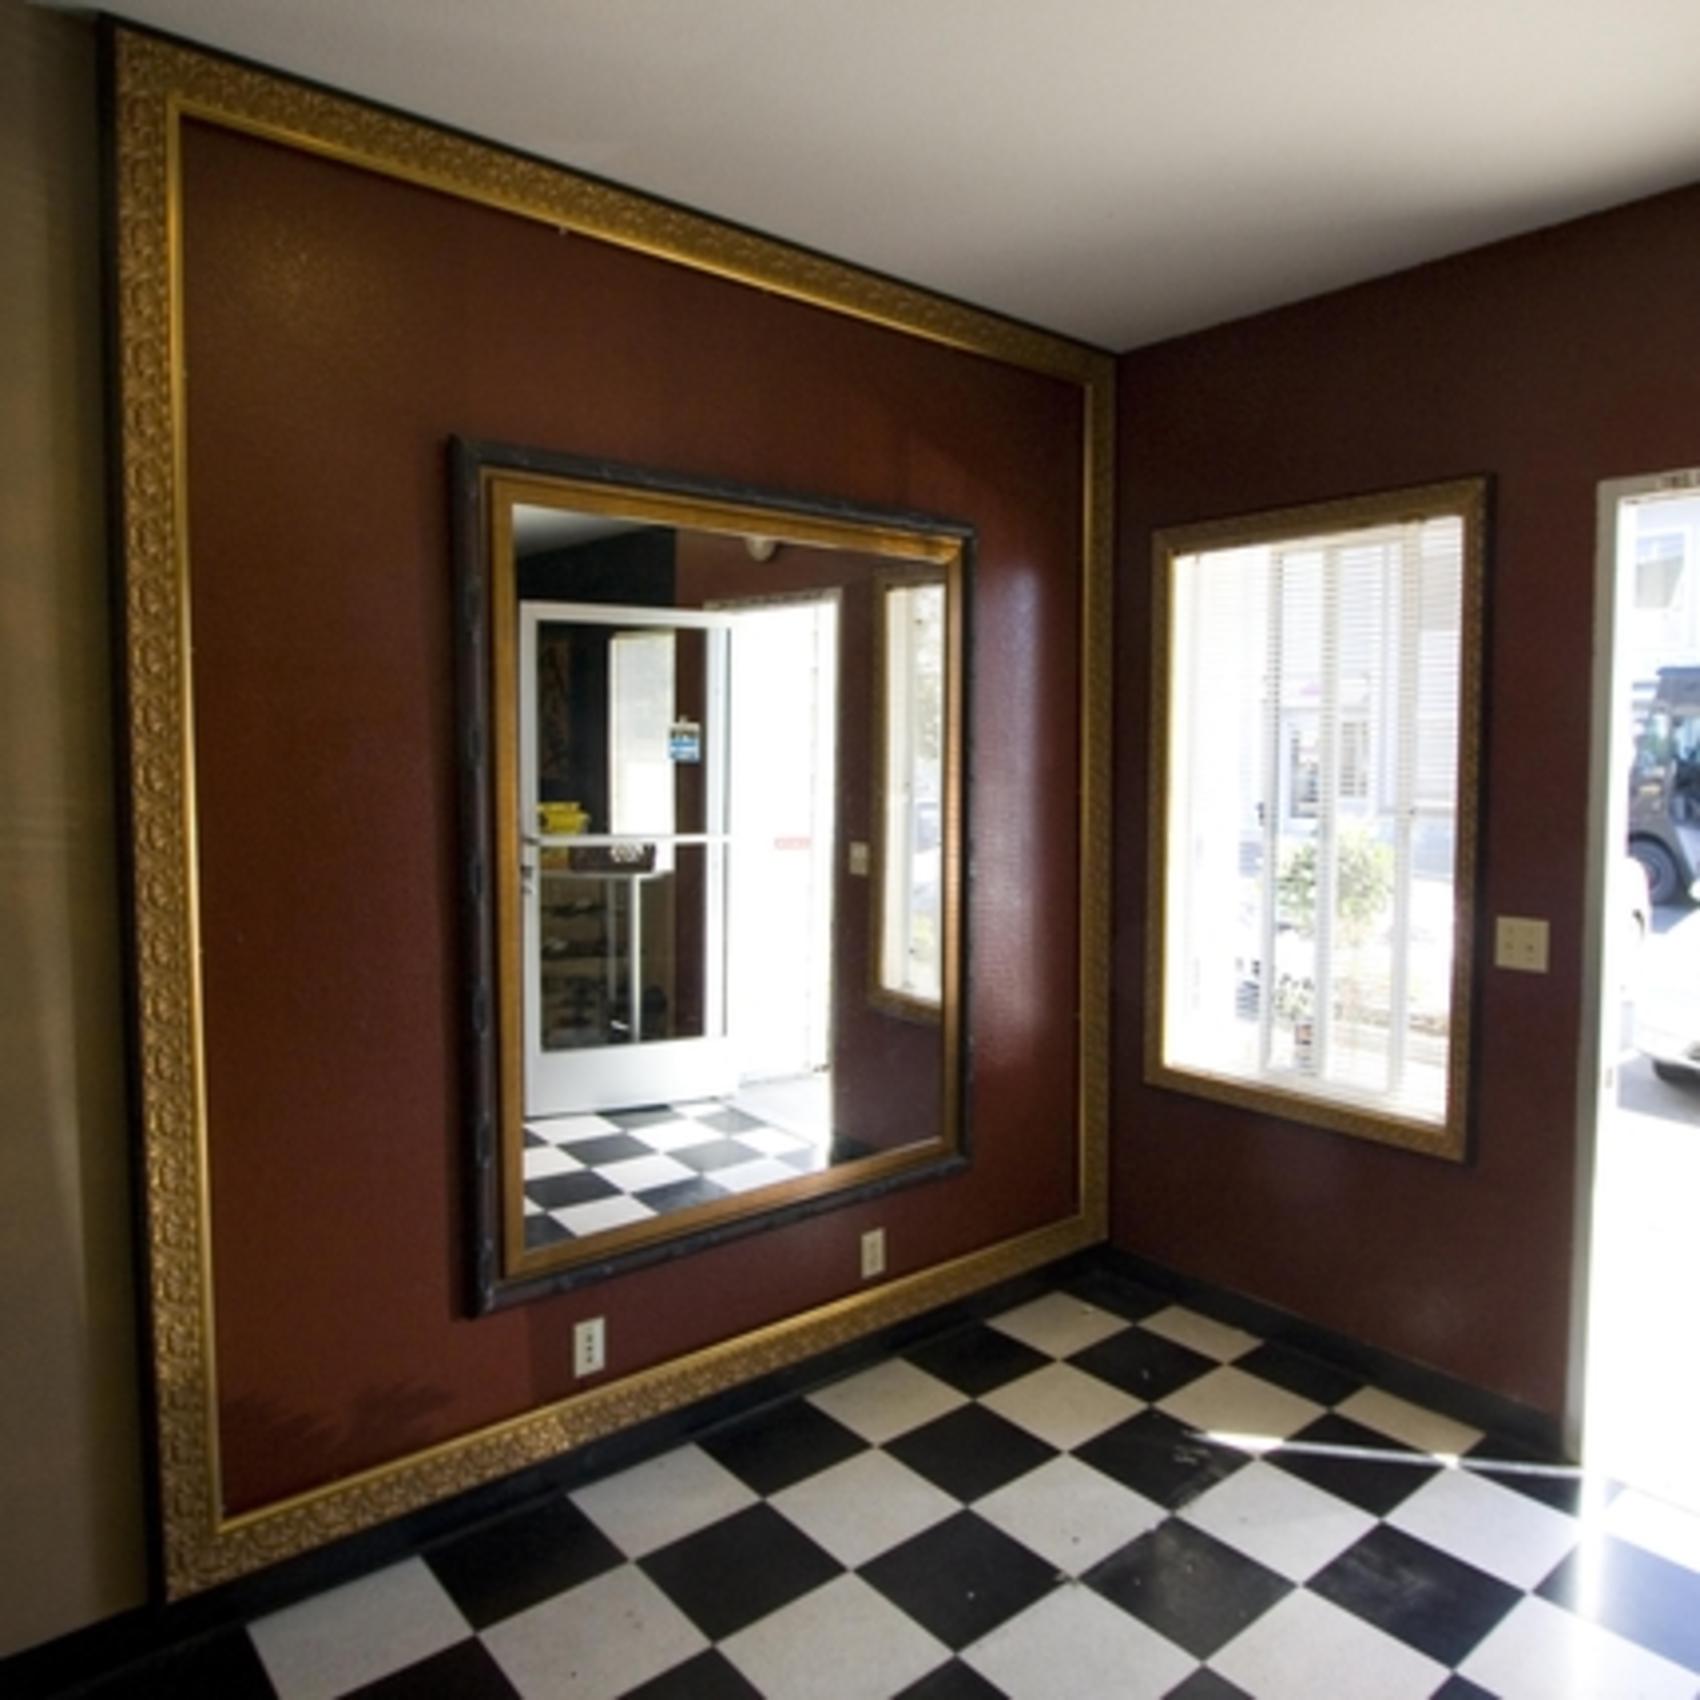 Lobby Area - Large Wall Frame and Window Trim